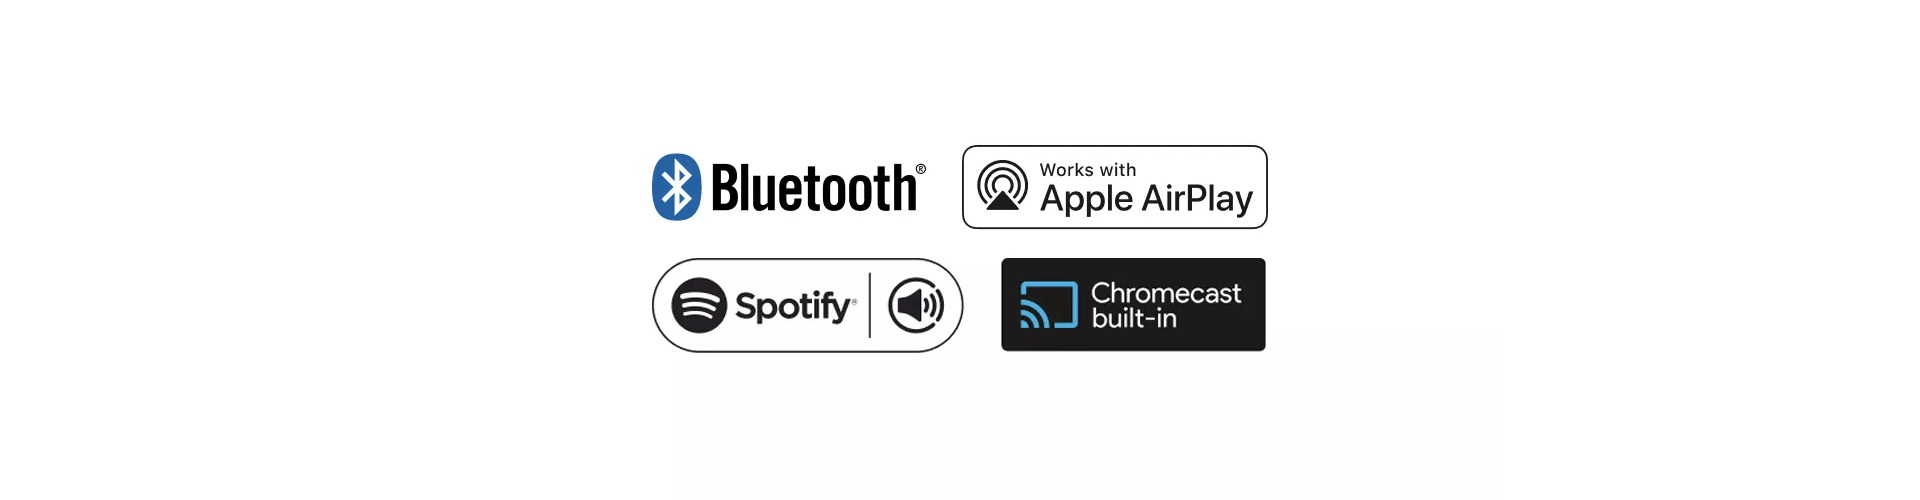 Bluetooth and Works with Apple AirPlay logos